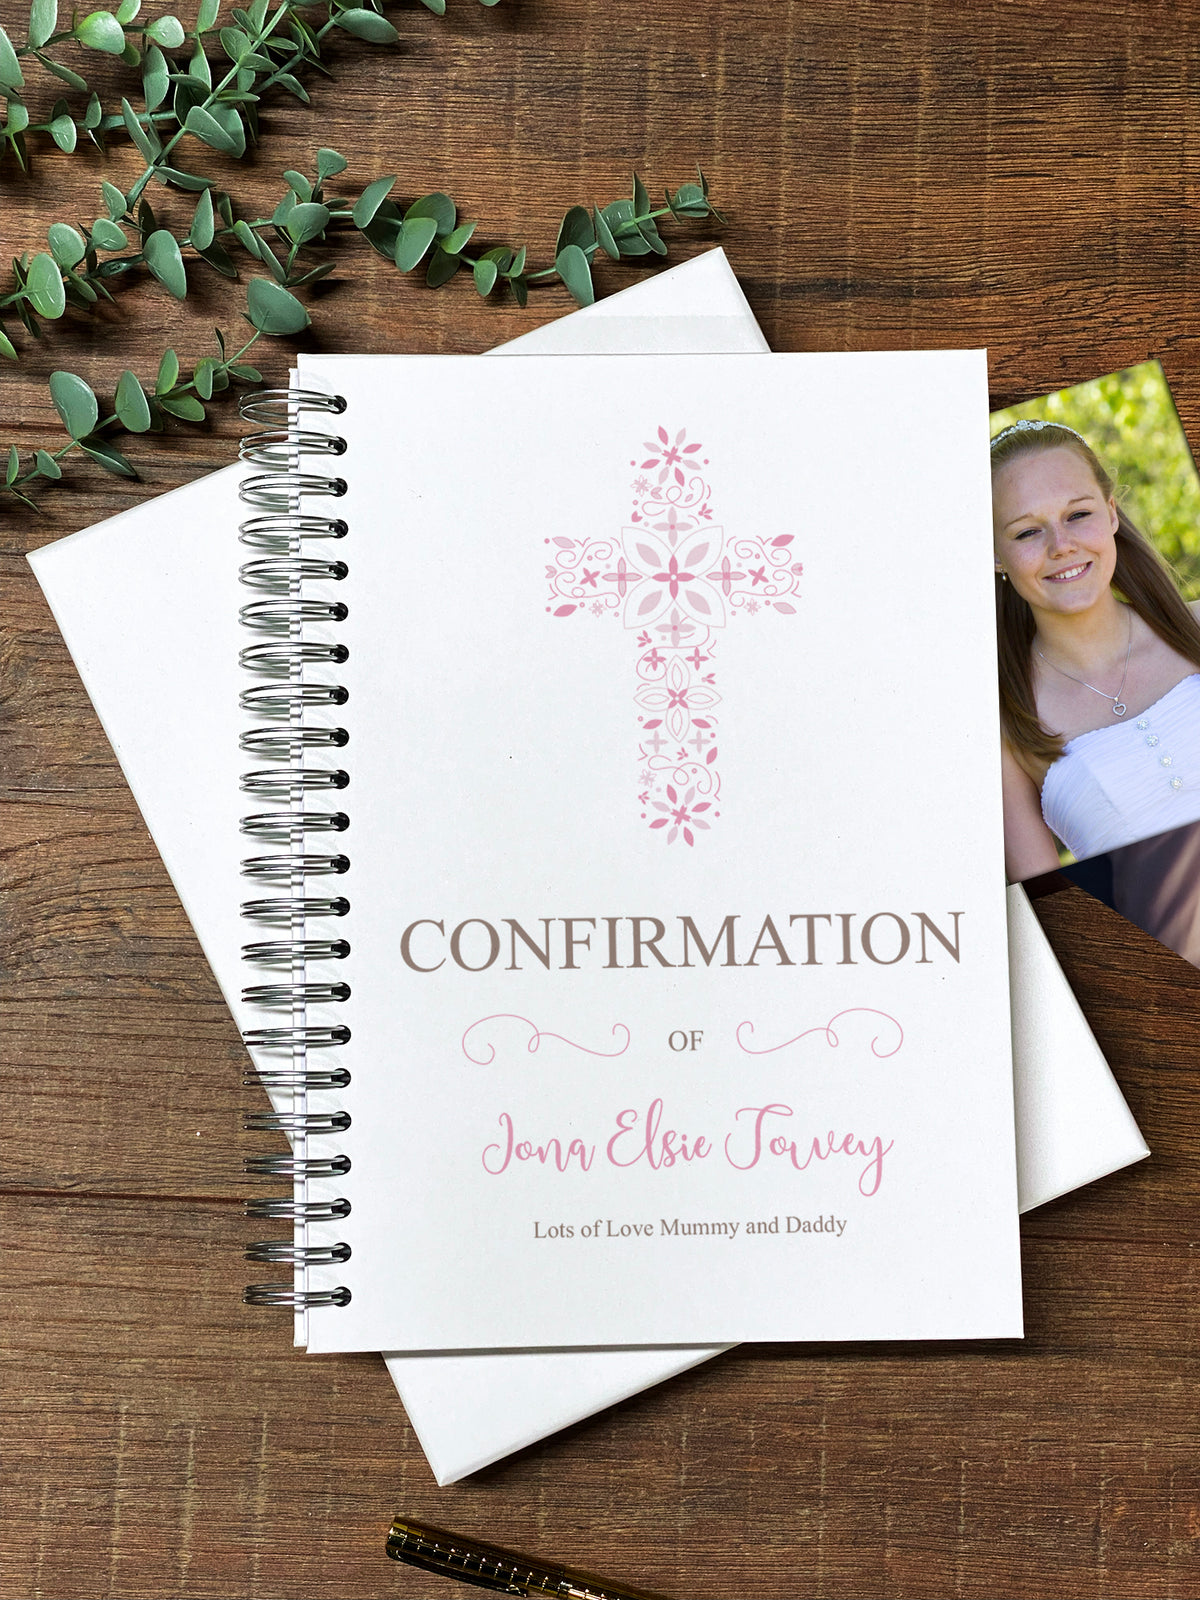 Large Confirmation Photo Album Scrapbook Guest Book Boxed With Pink Cross